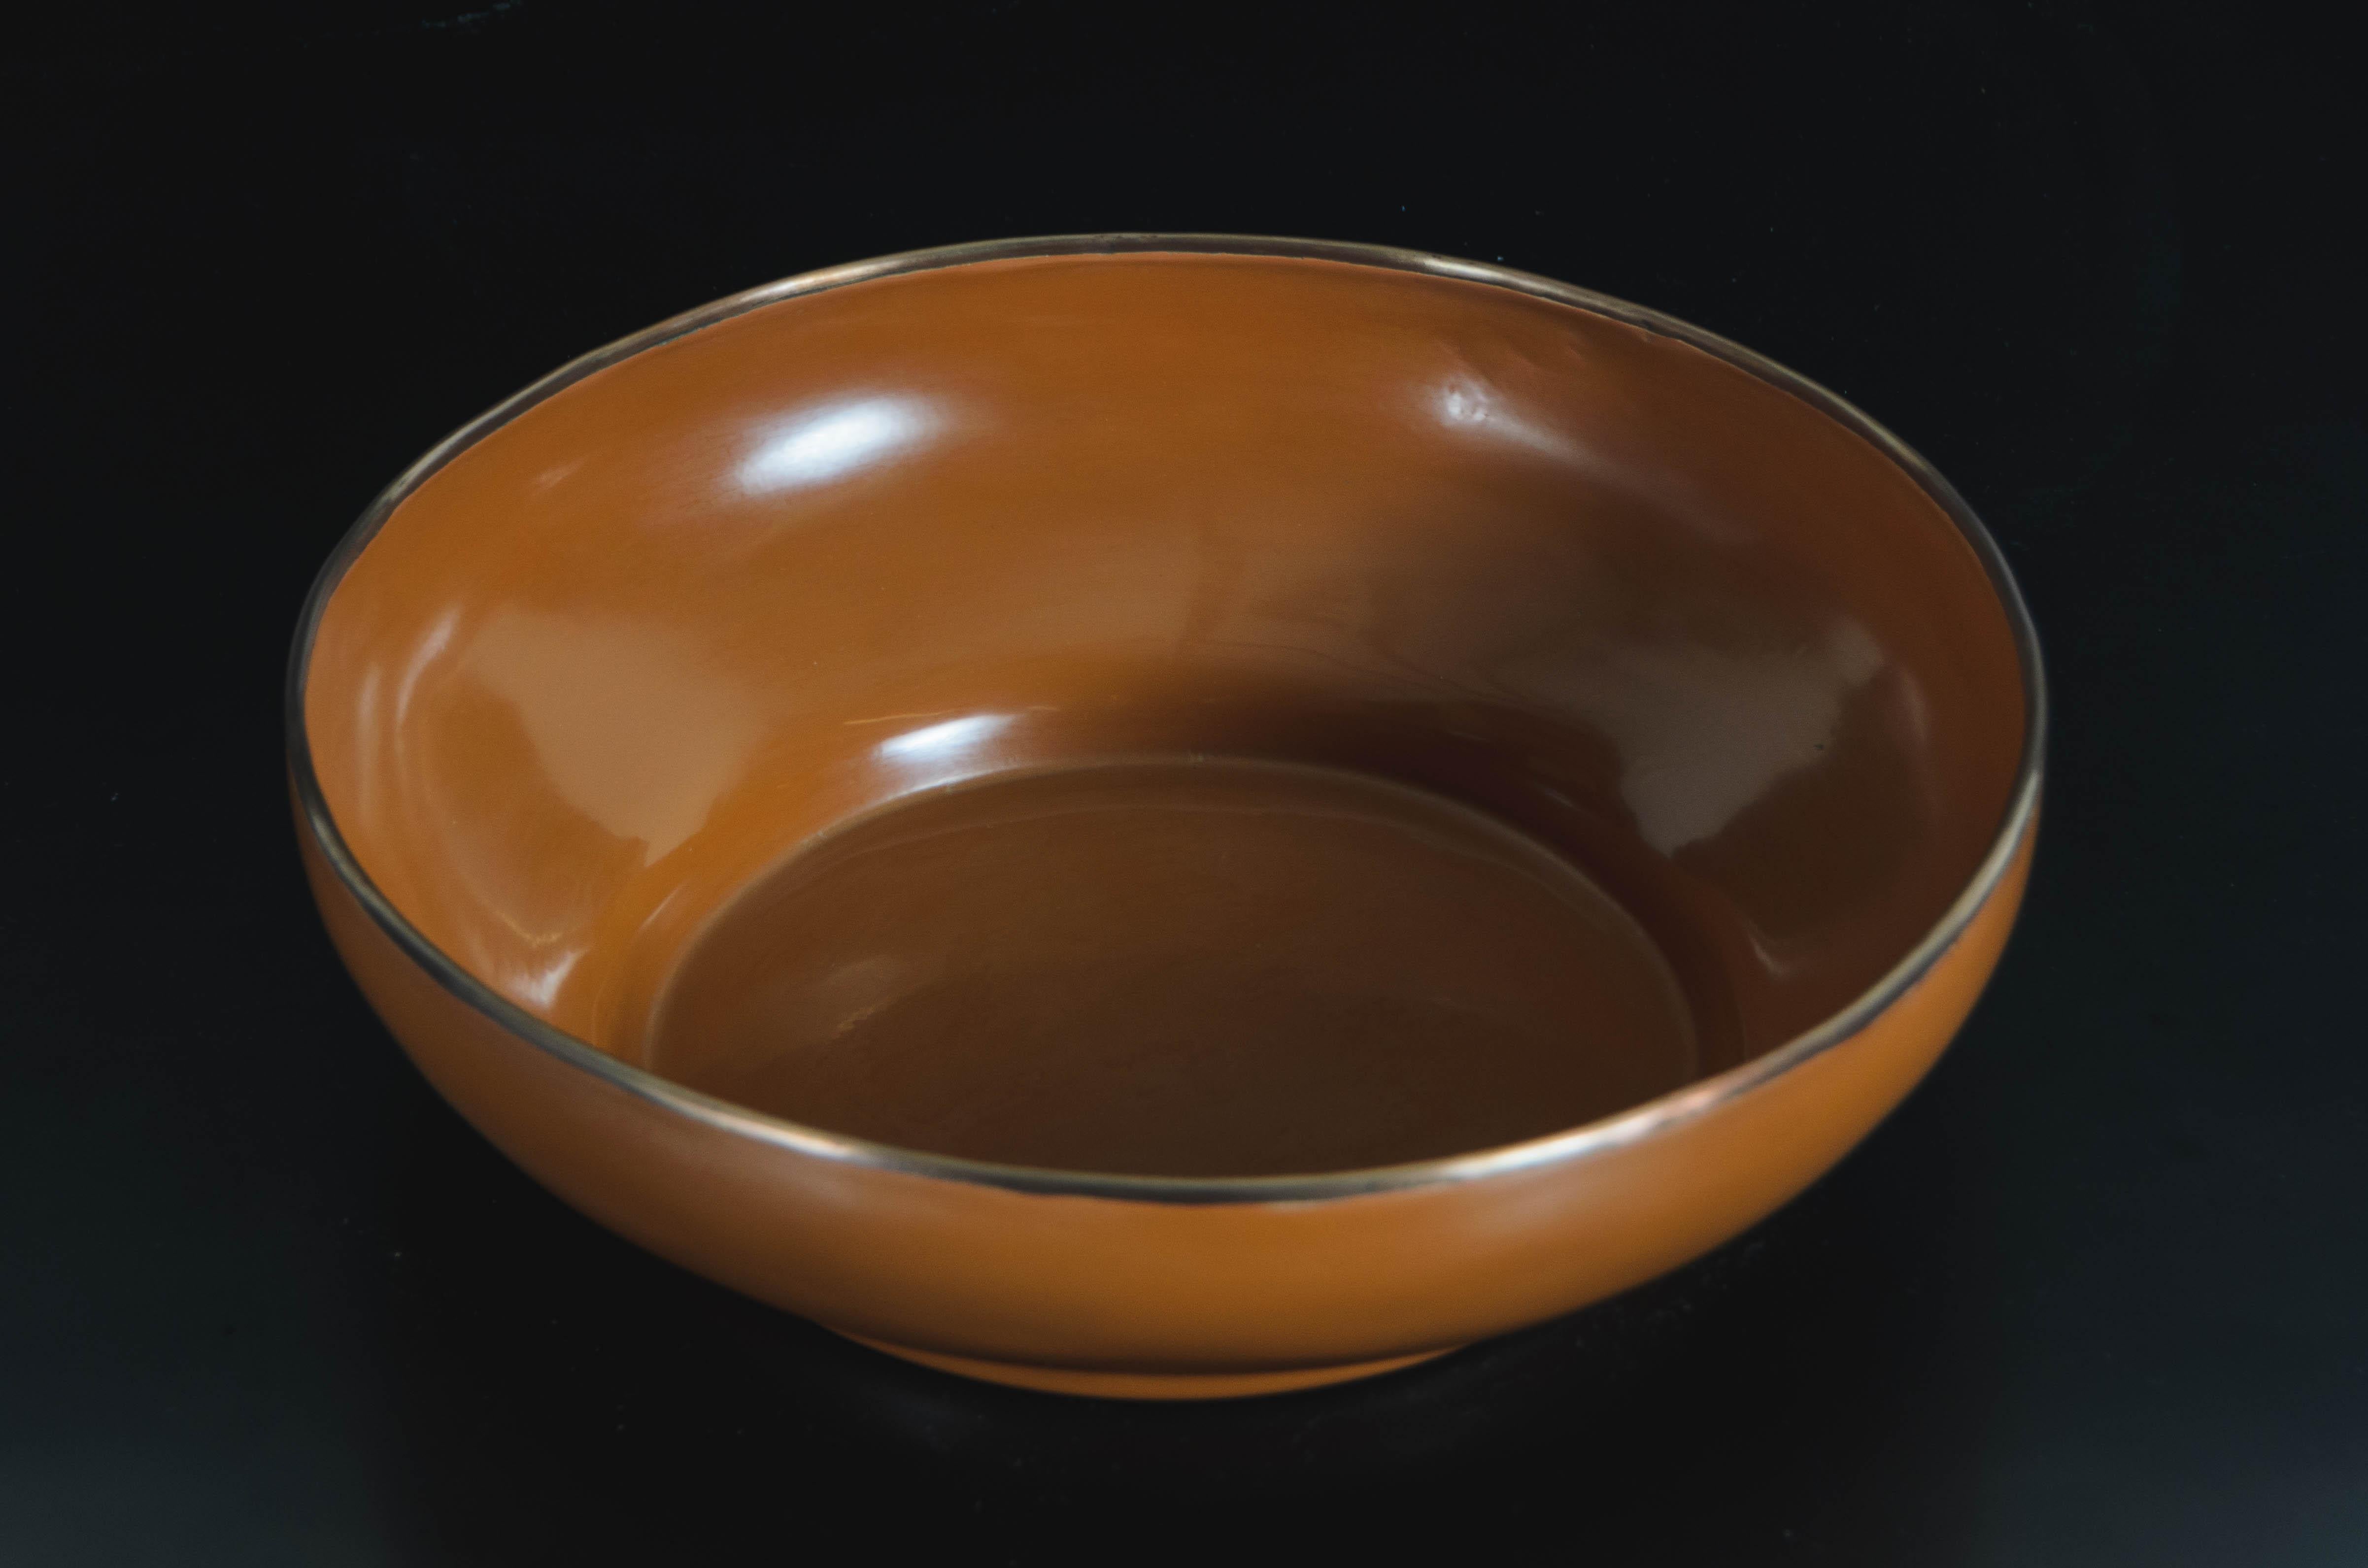 Minimalist Contemporary Large Footed Bowl W/ Copper Rim in Mila Lacquer by Robert Kuo For Sale